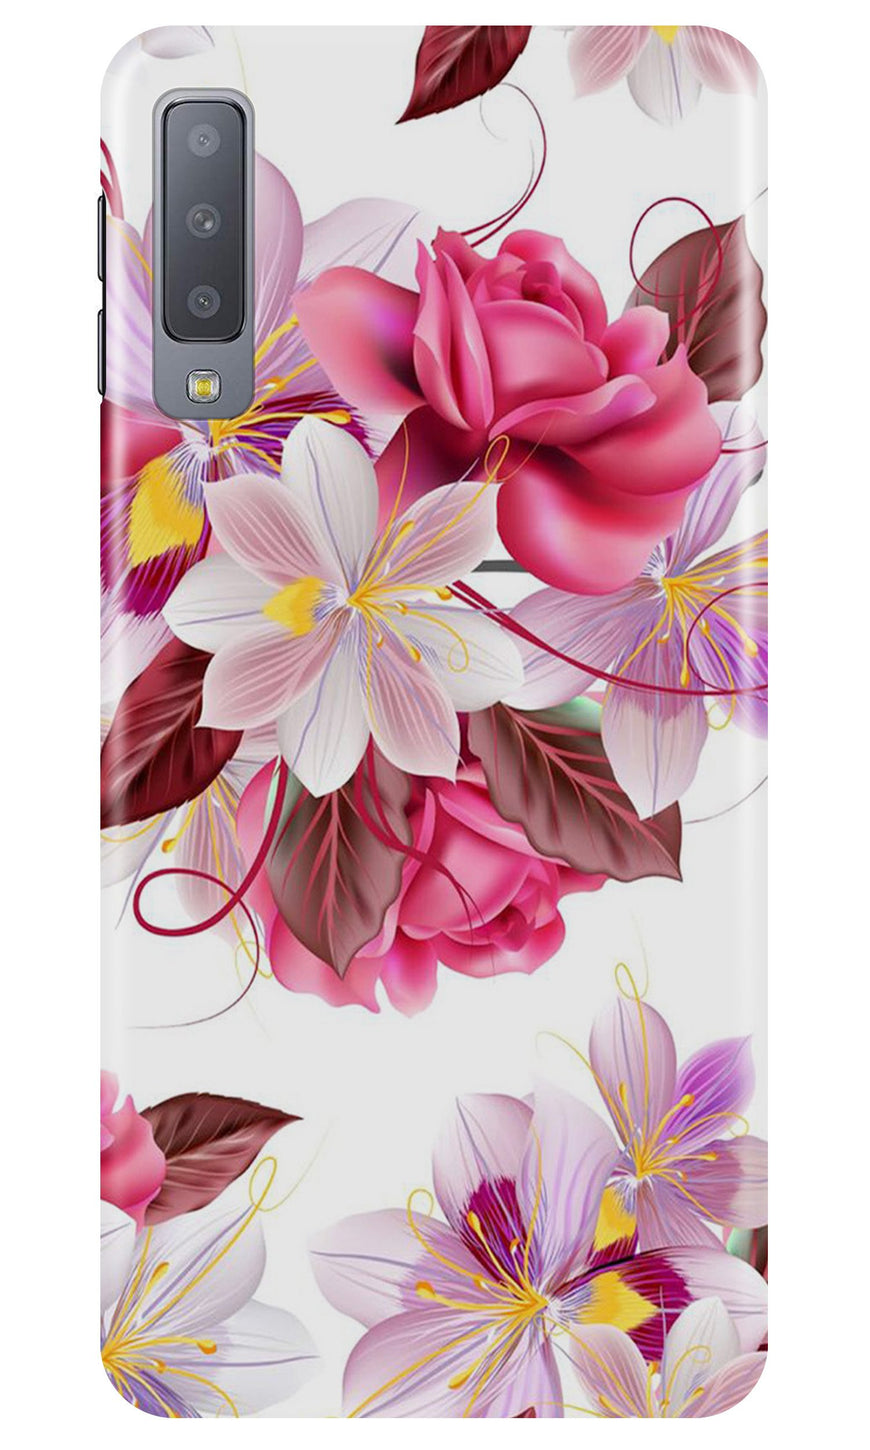 Beautiful flowers Case for Samsung Galaxy A50s